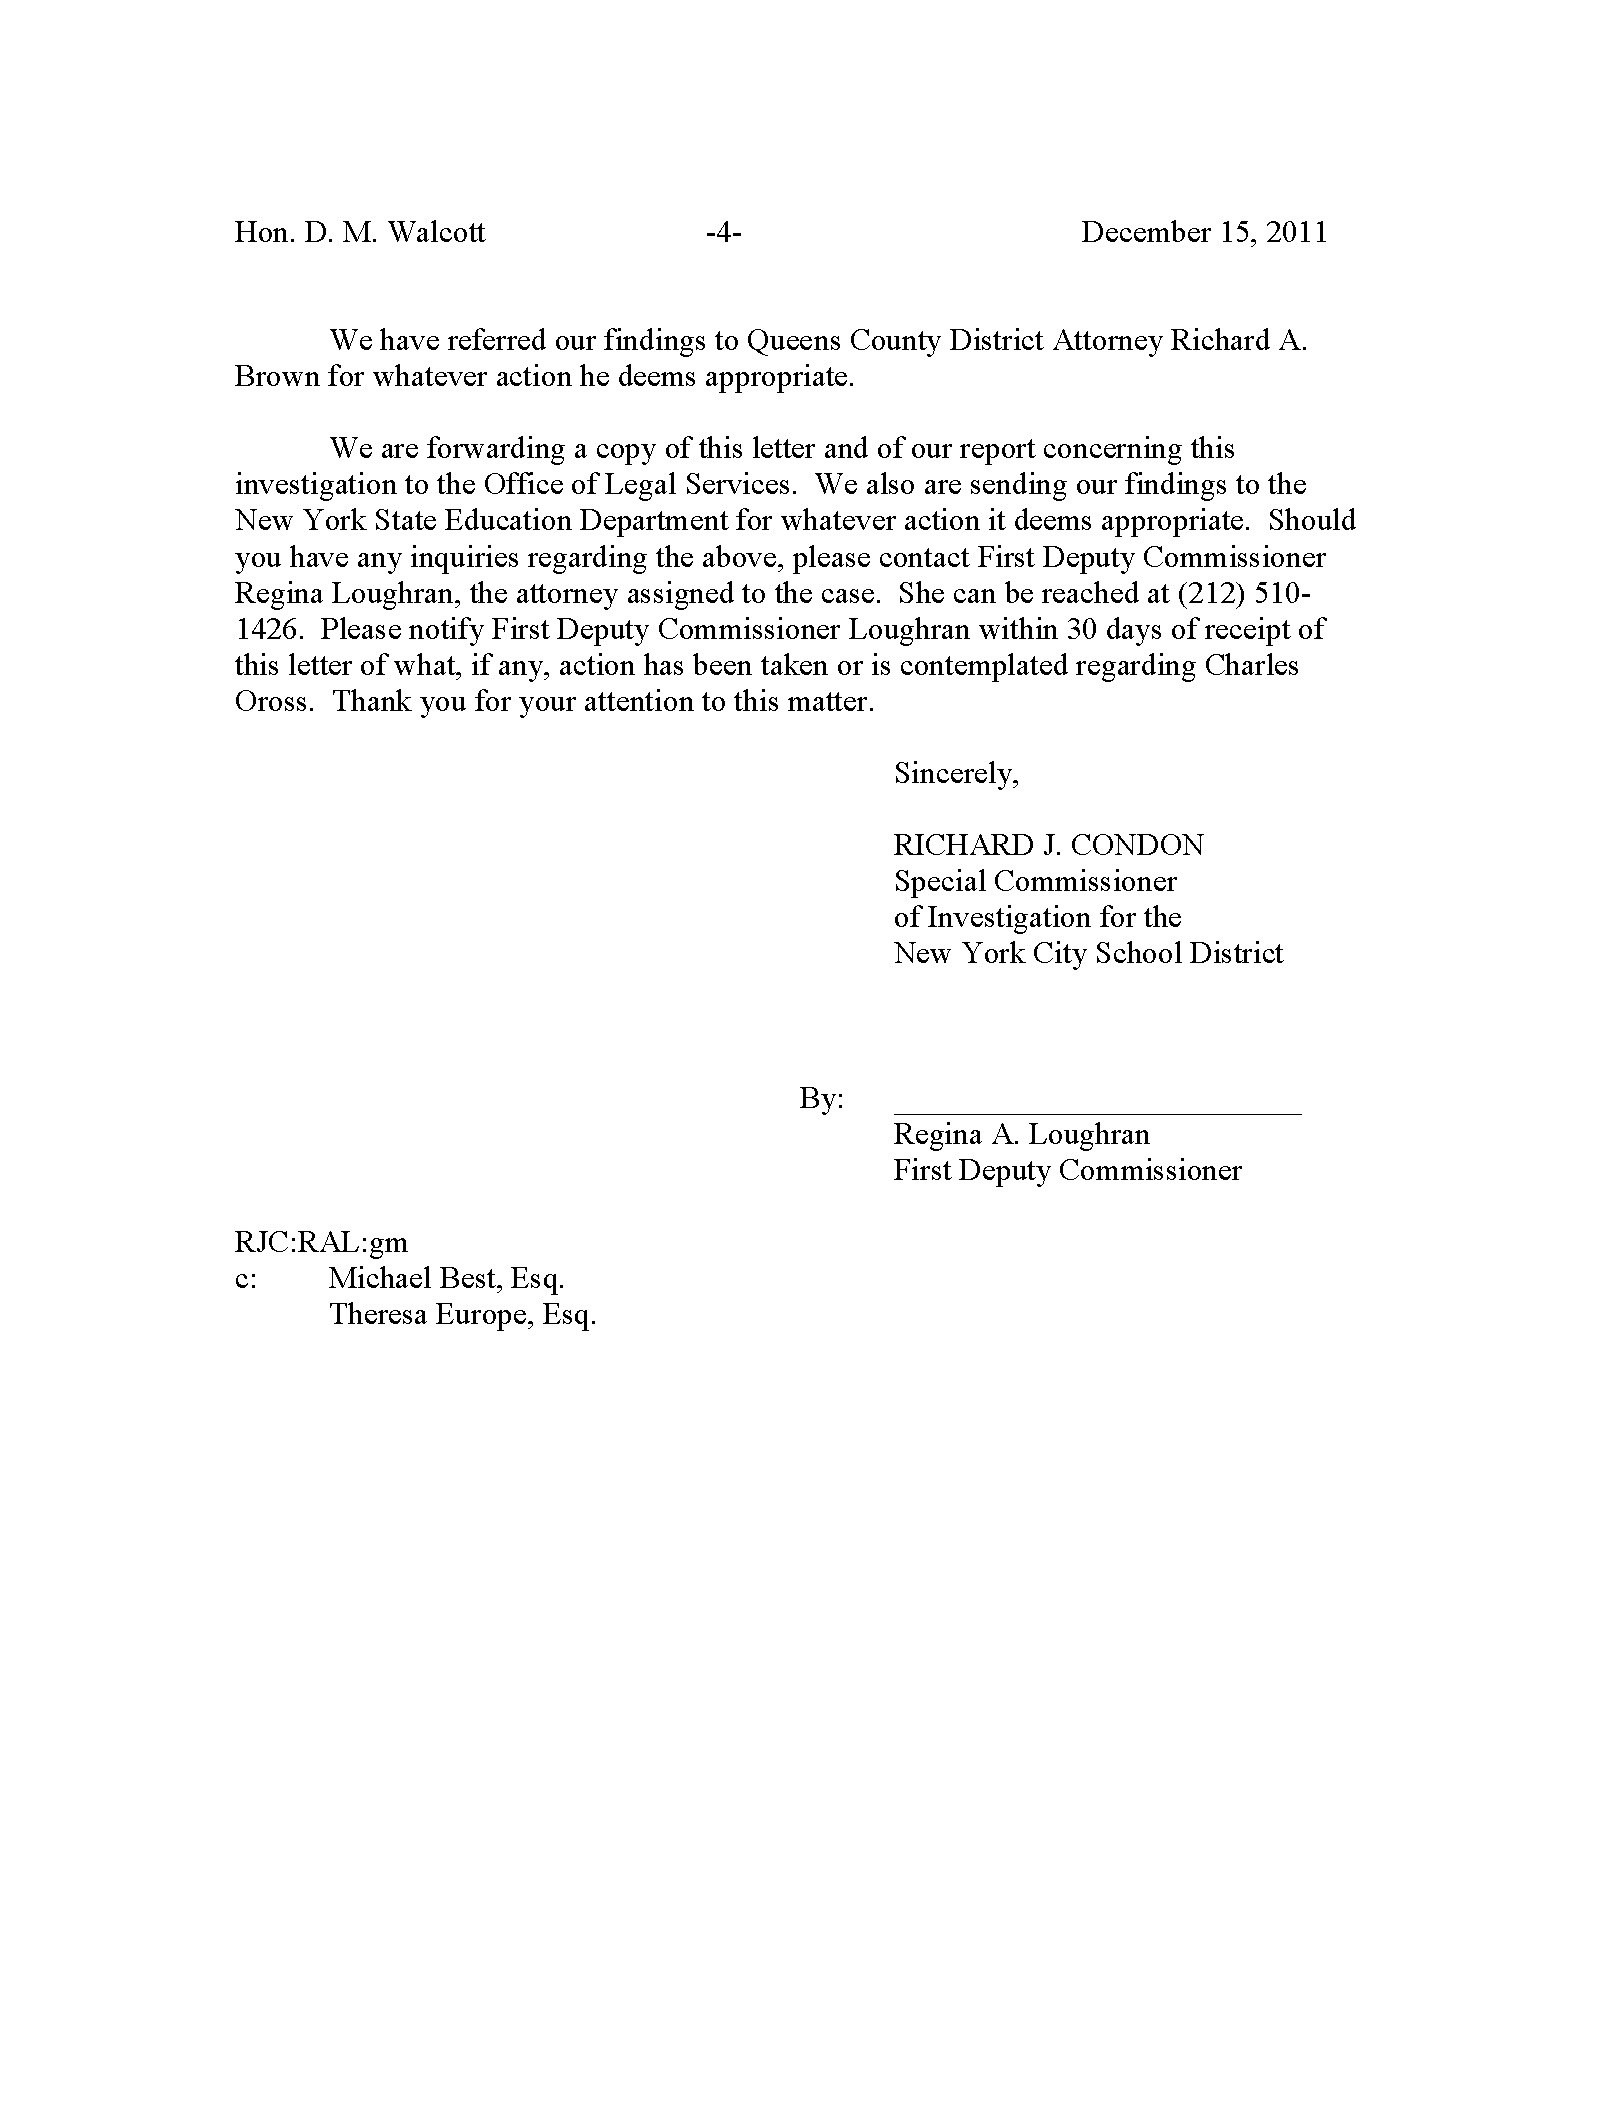 Copy of oross charles investigation report4.png